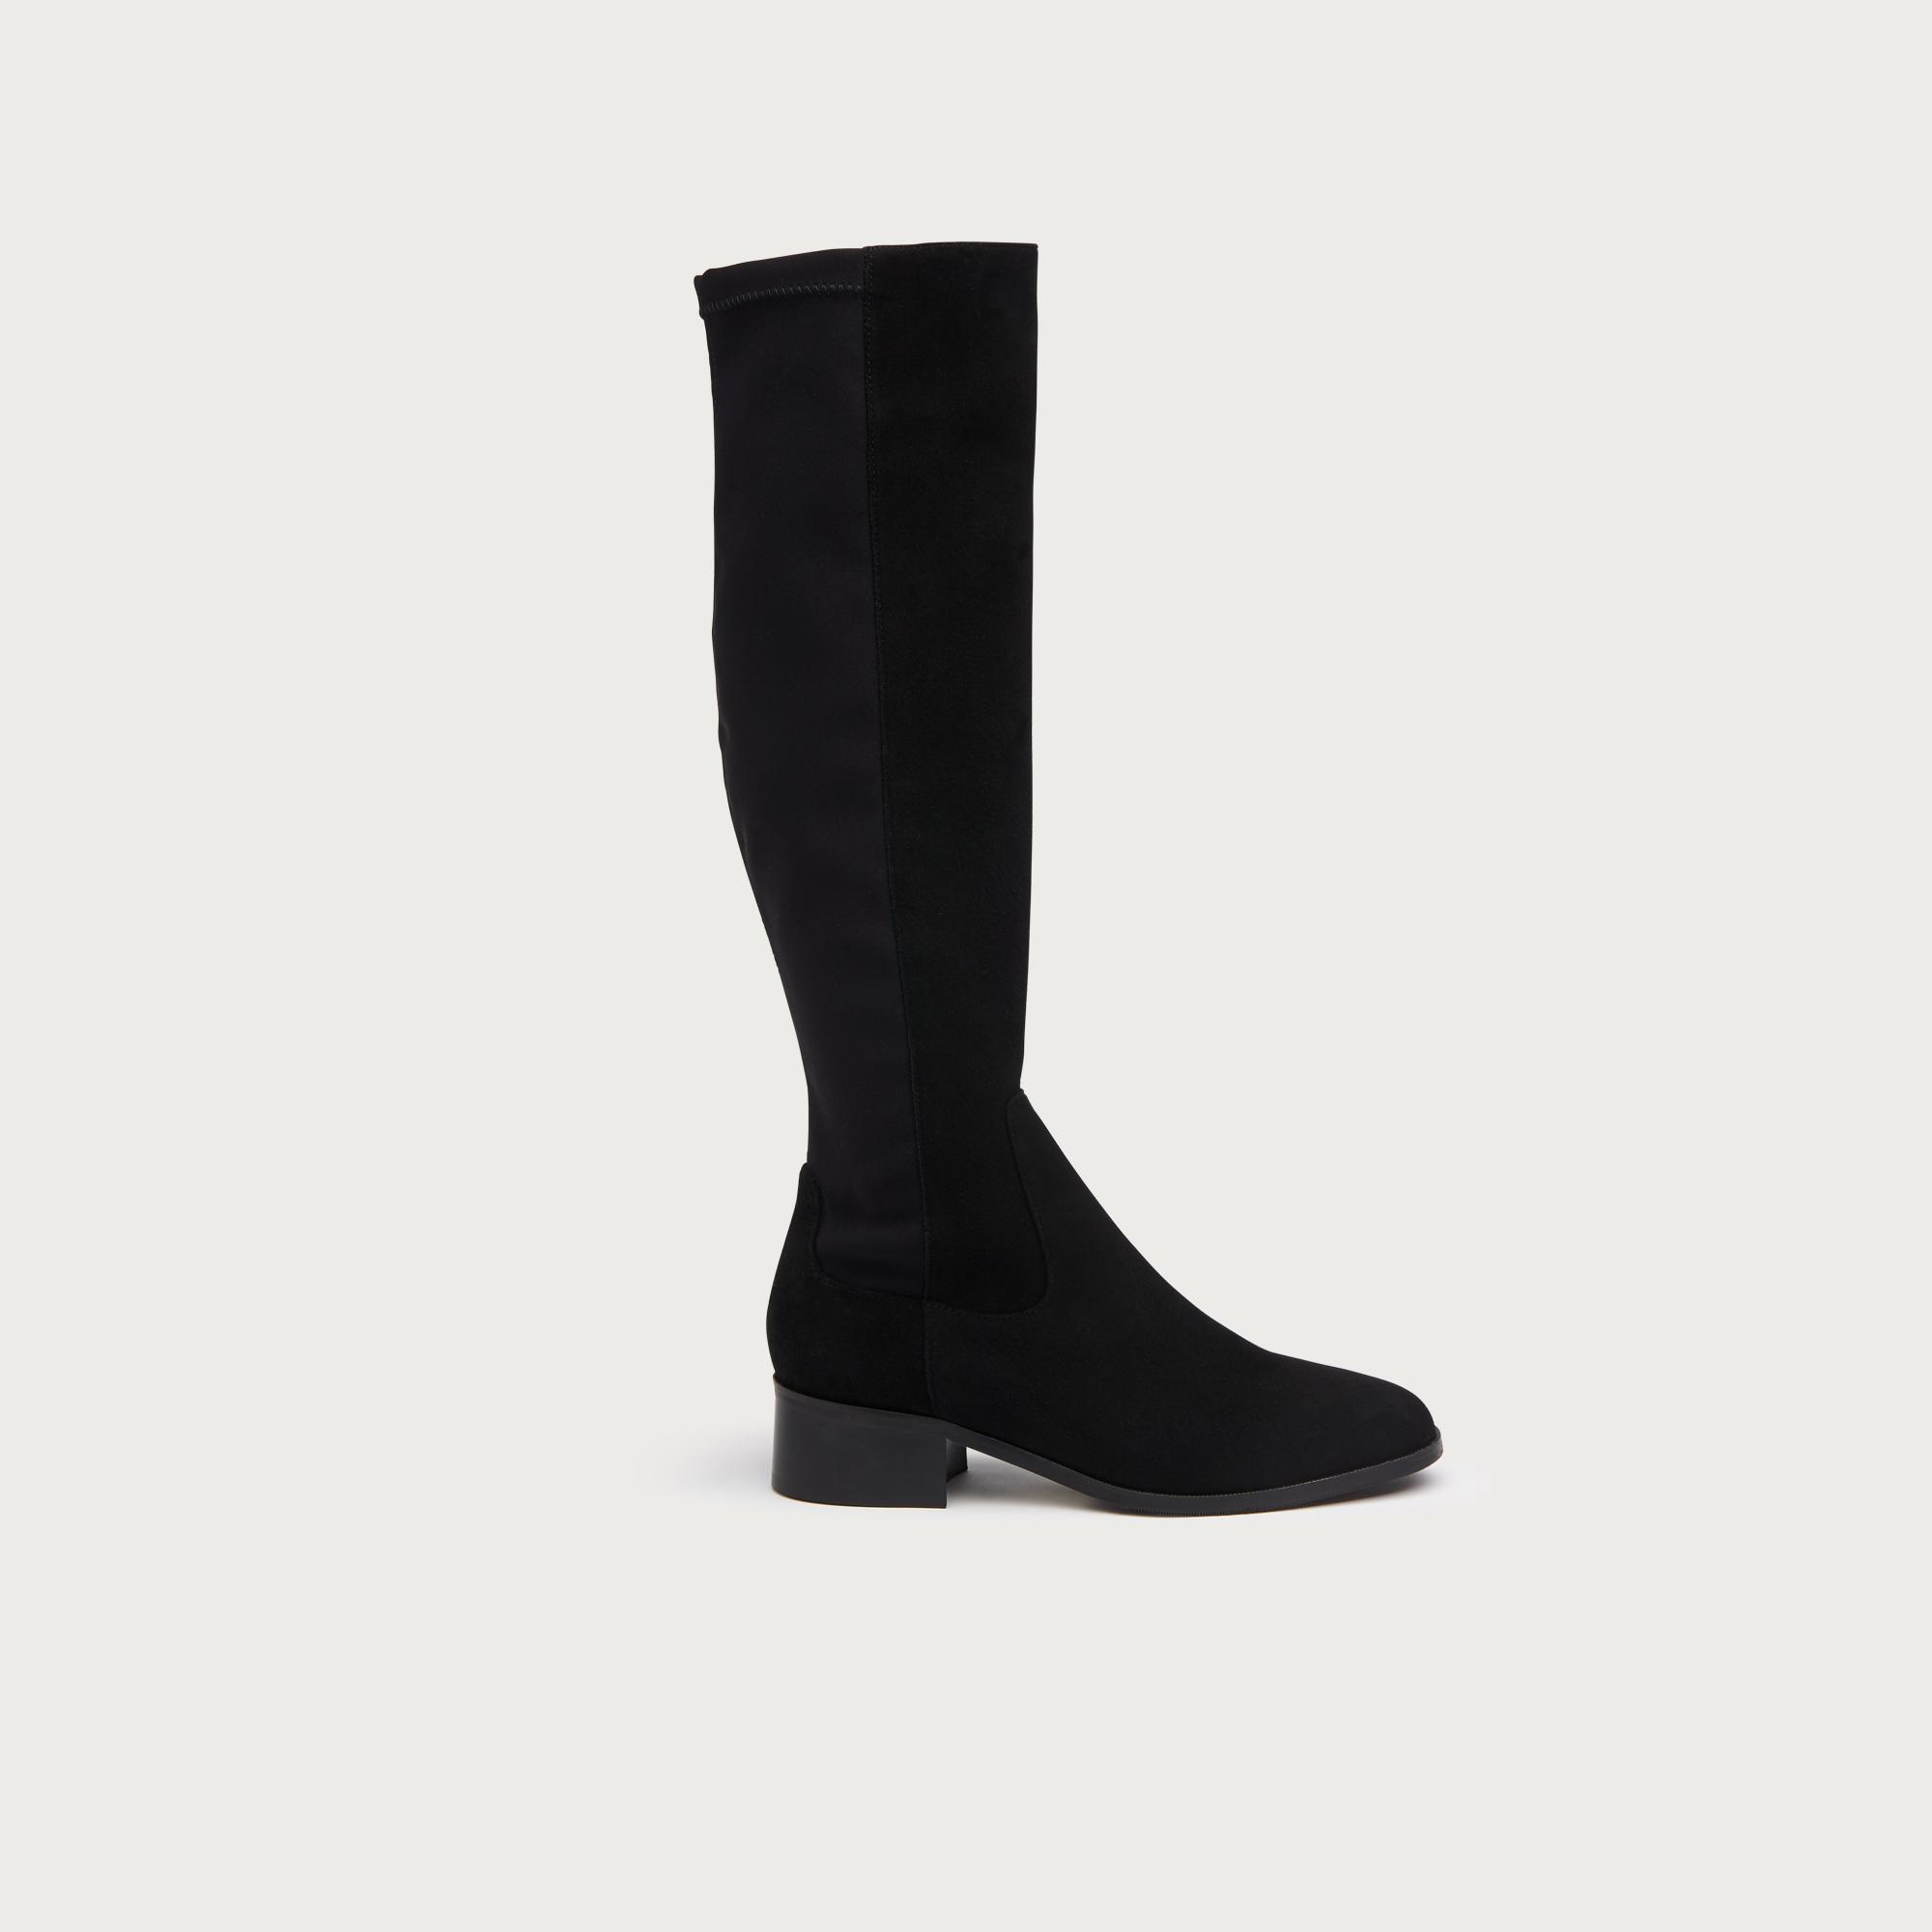 black leather knee high low heel boots